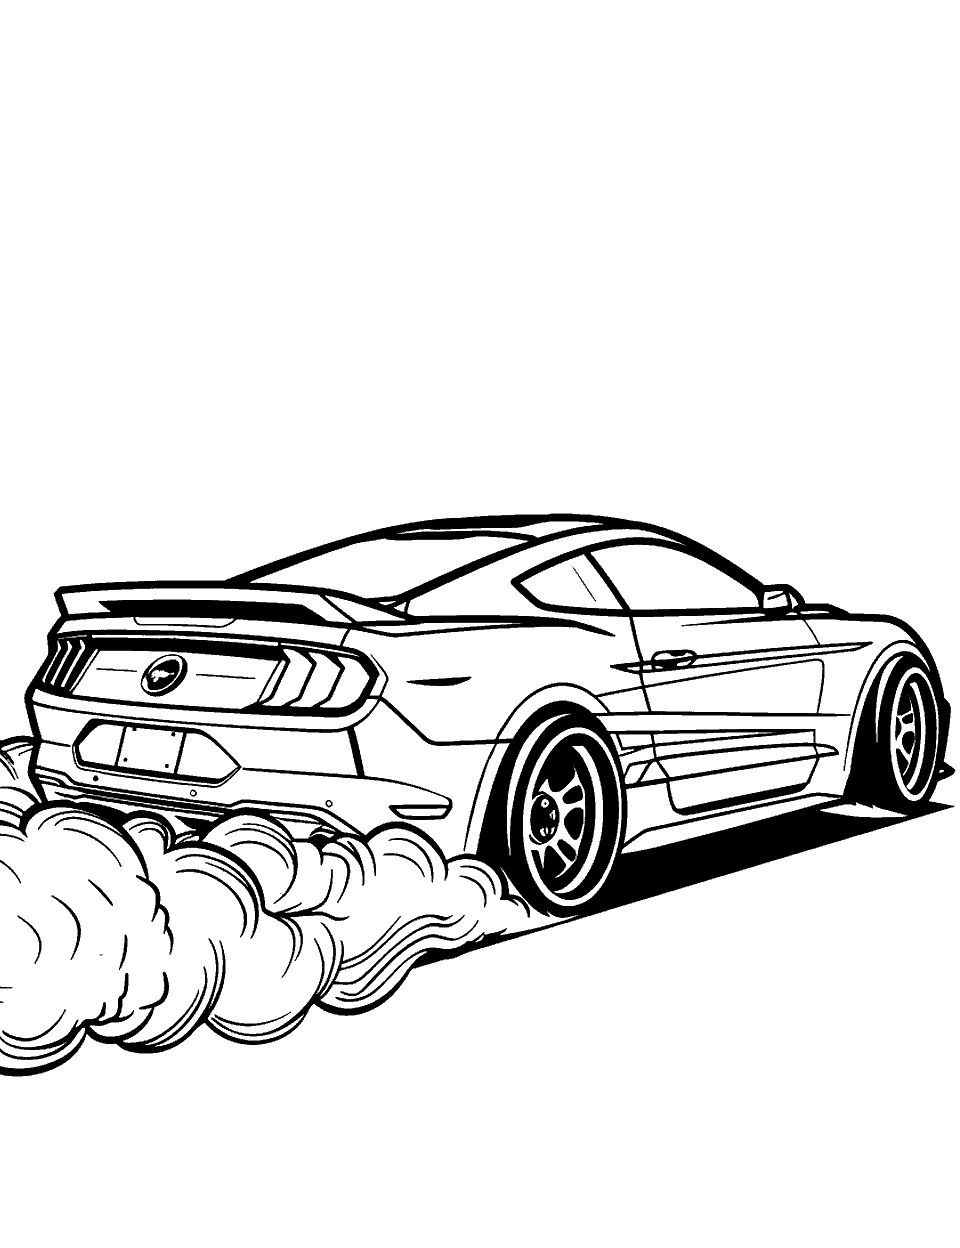 Mustang Muscle Power Coloring Page - A Ford Mustang performs a powerful burnout, smoke billowing from its tires.